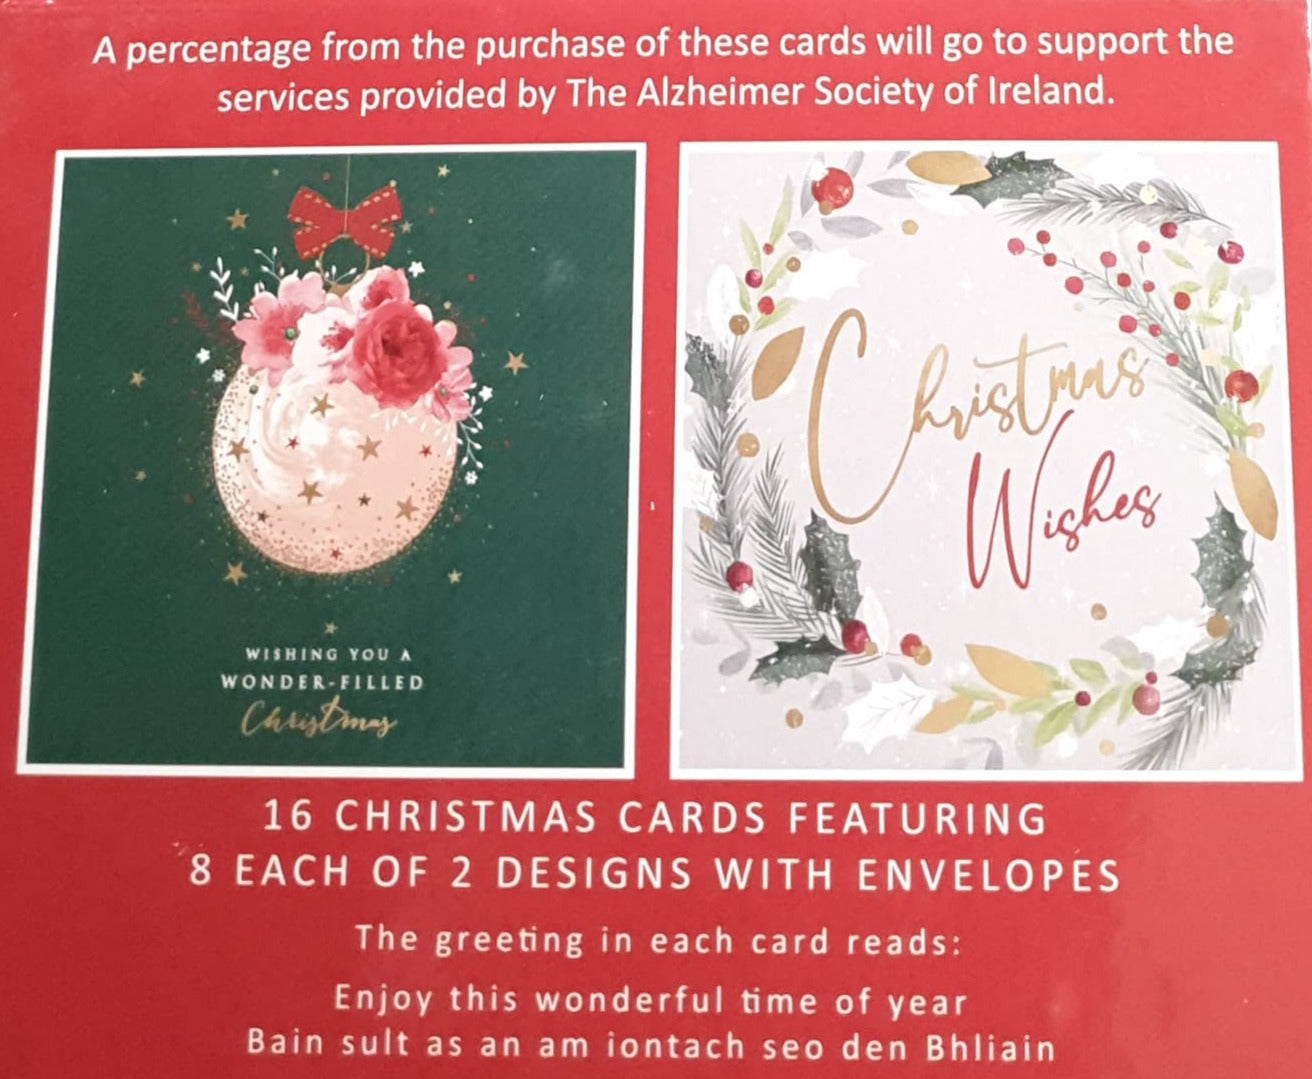 Charity Christmas Card (In Irish & English) - Box of 16 / Alzheimer Society of Ireland - White Bauble with Pink Roses